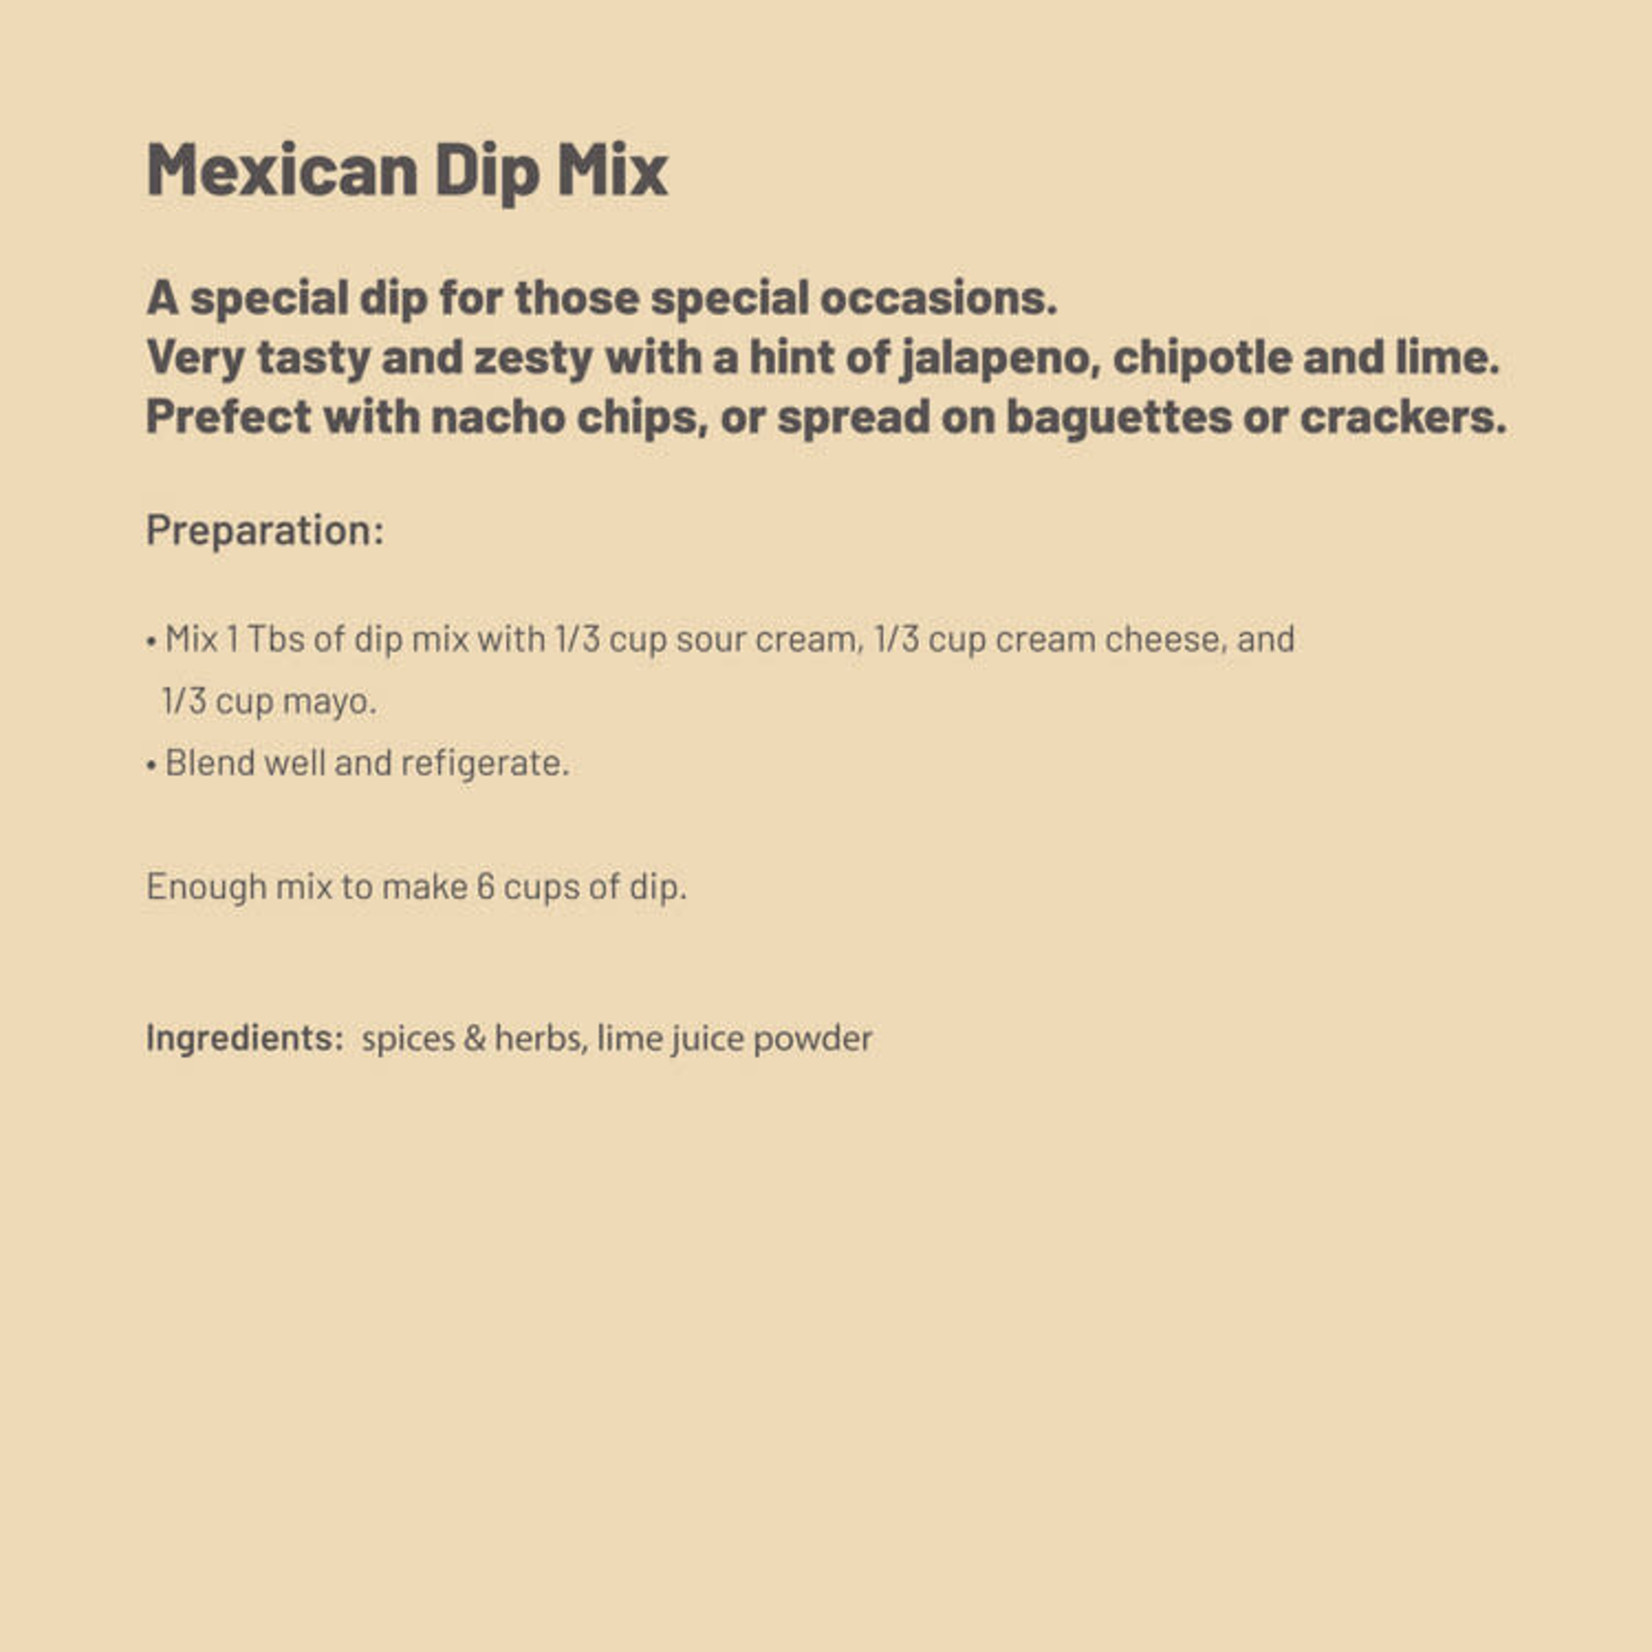 SPICE WORKS SPICE WORKS Mexican Dip 50g